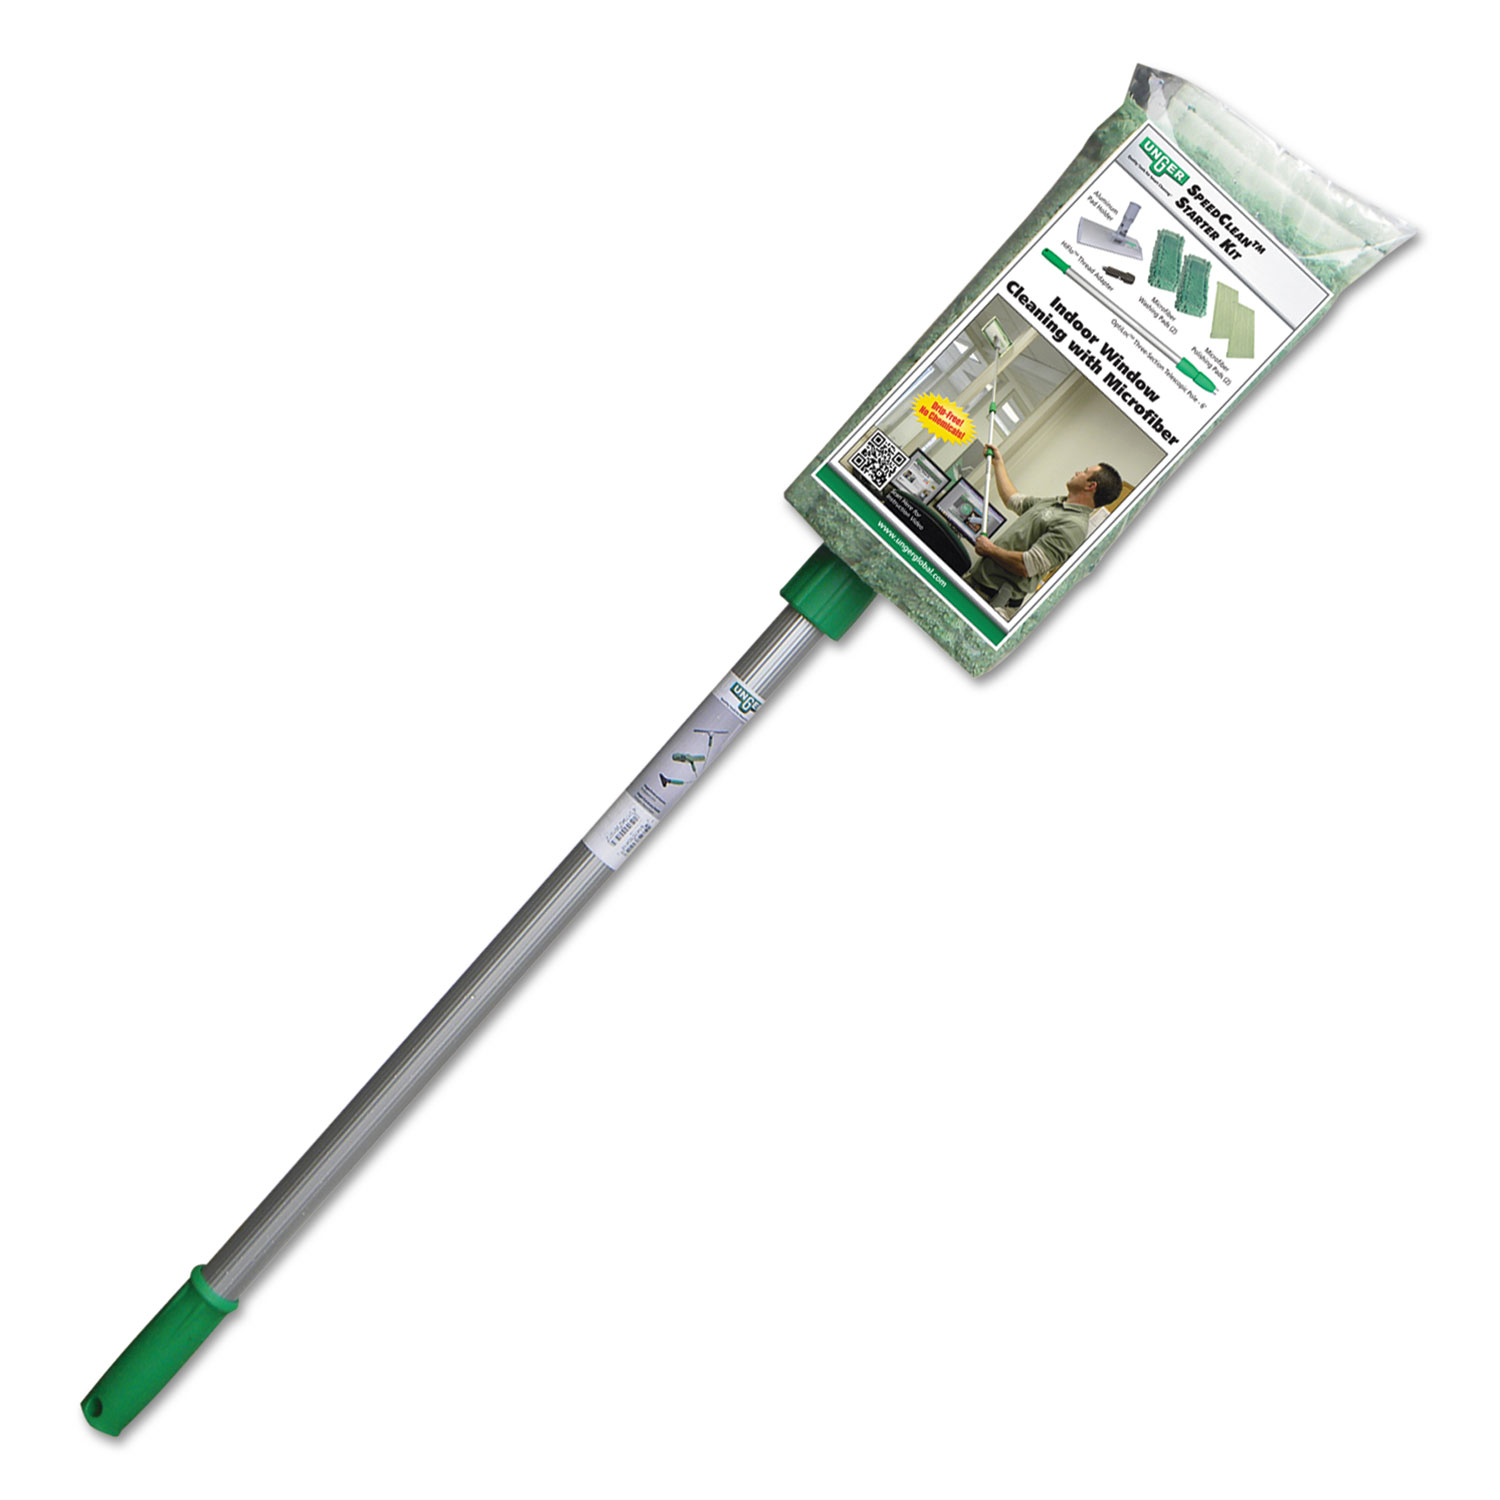 Indoor Window Cleaning Kit, Aluminum, 72 Extension Pole, 8 Pad Holder